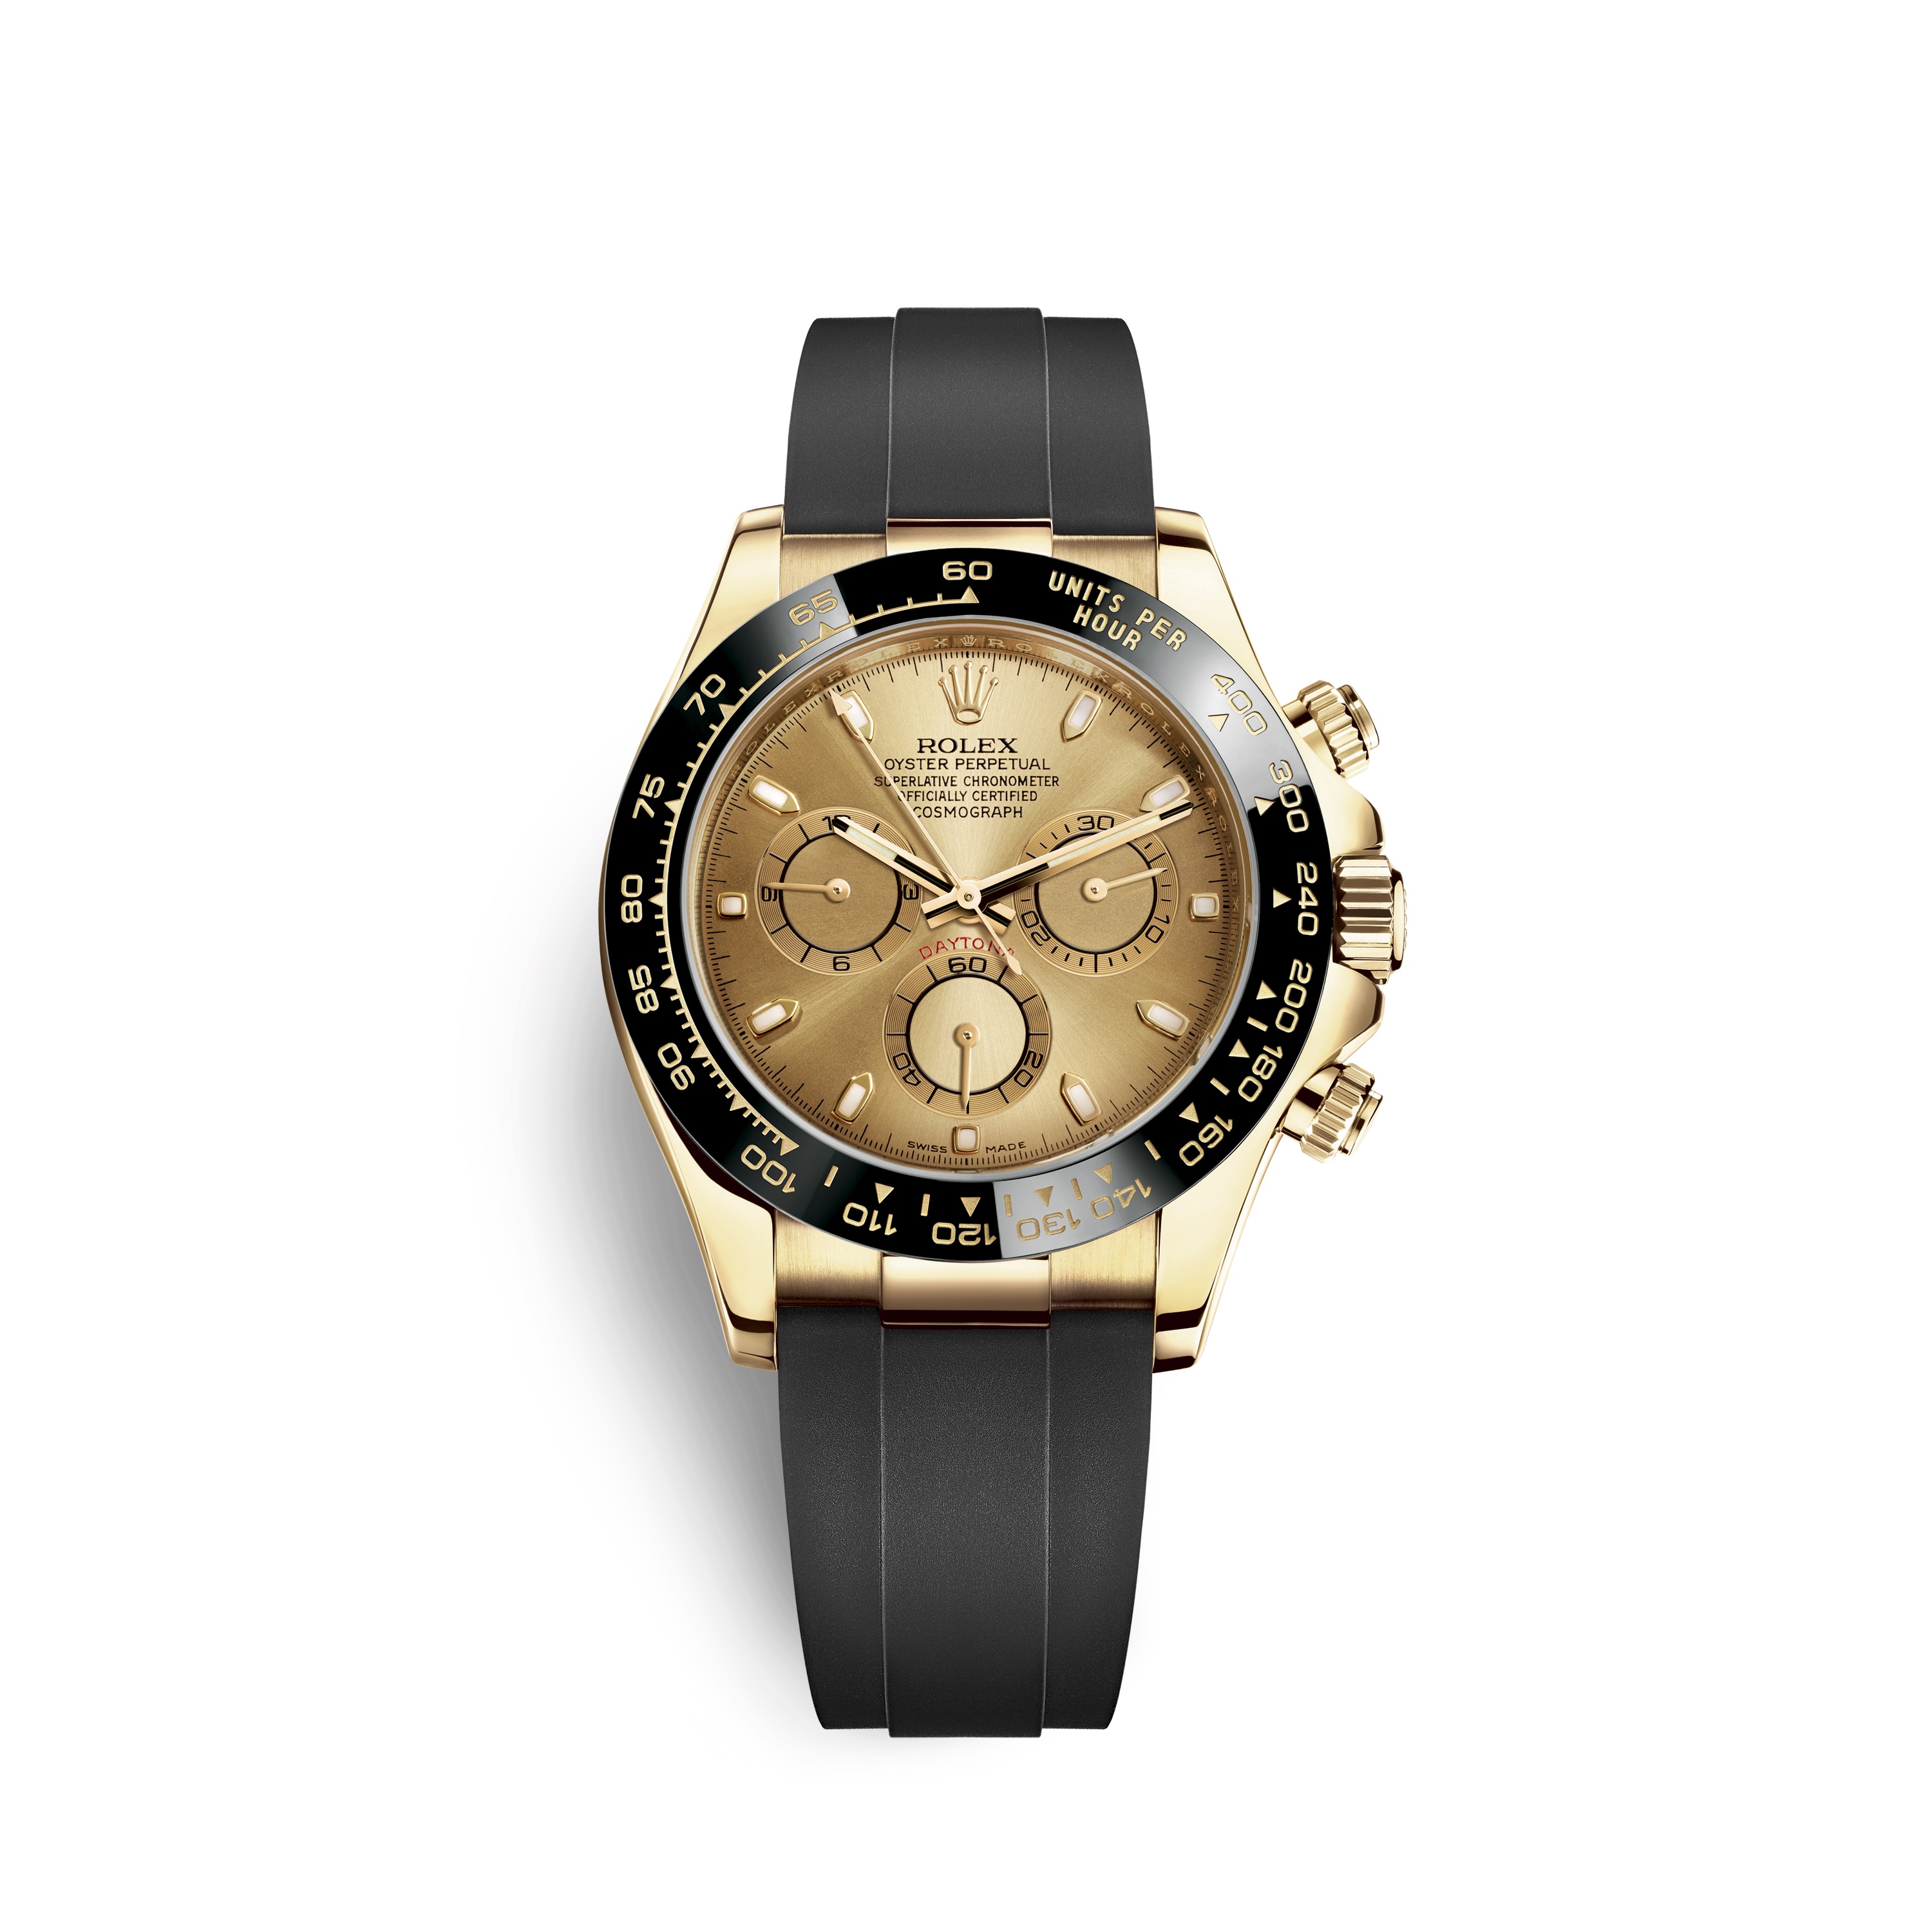 Cosmograph Daytona 116518LN Gold Watch (Champagne-Color)